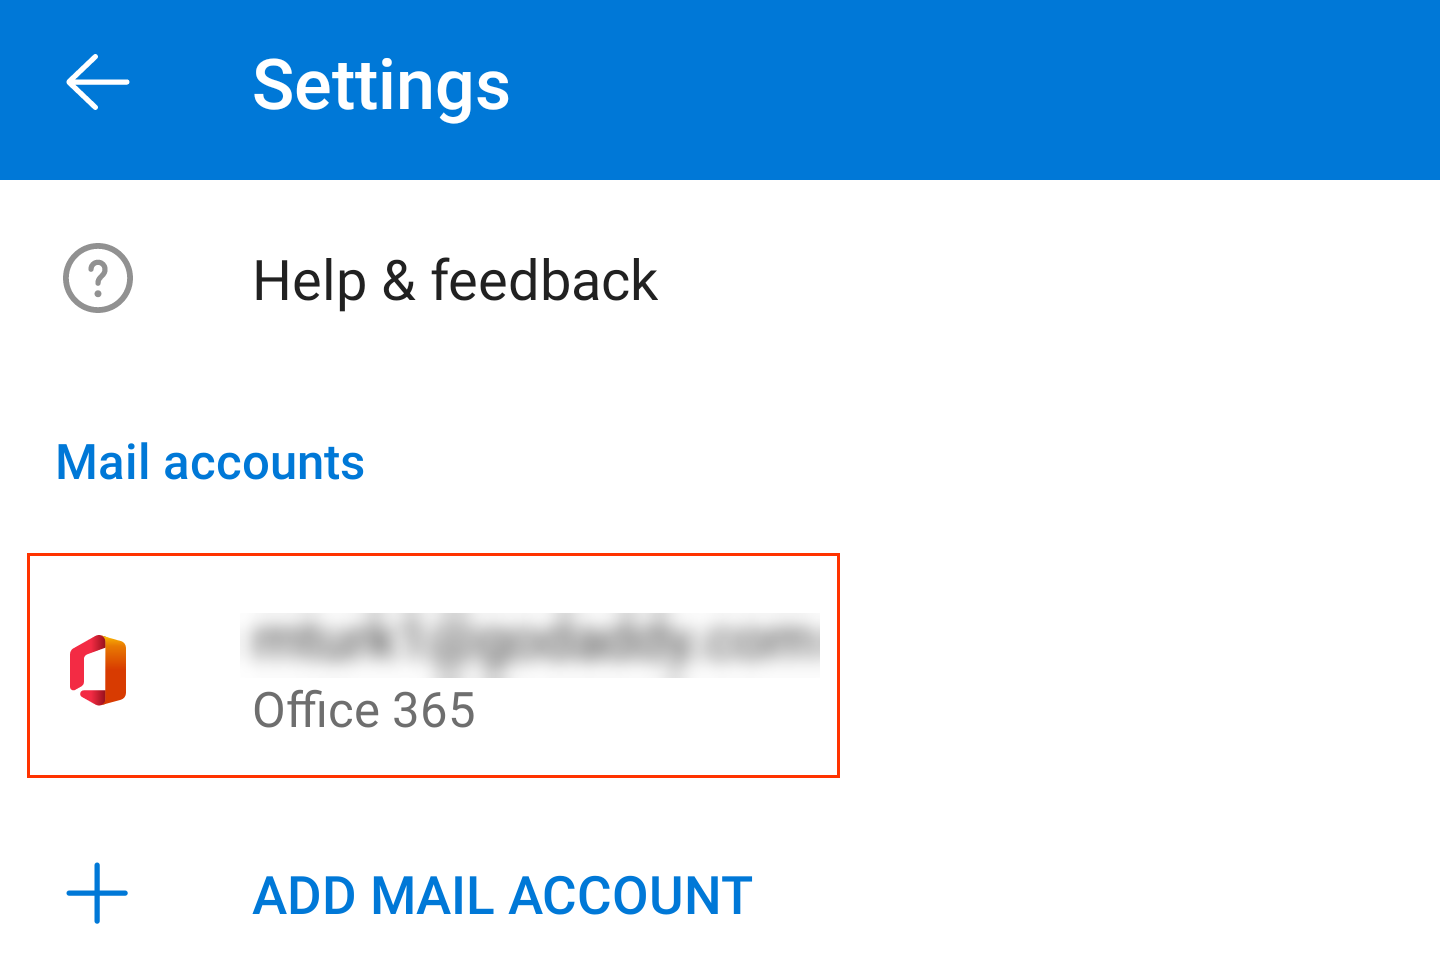 New Microsoft 365 email account displays in Settings